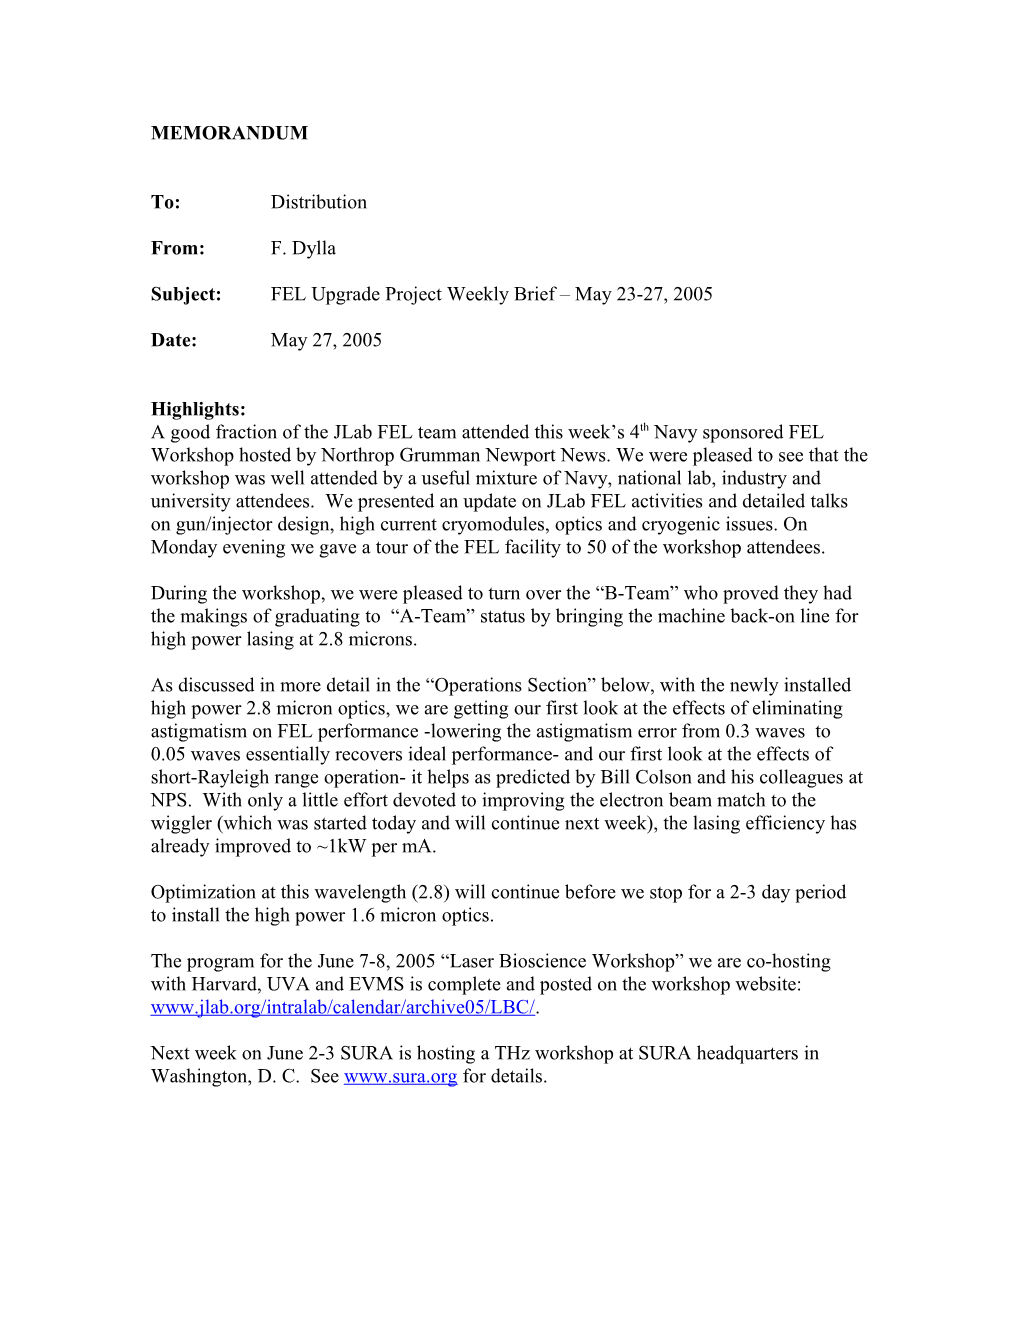 Subject:FEL Upgrade Project Weekly Brief May 23-27, 2005